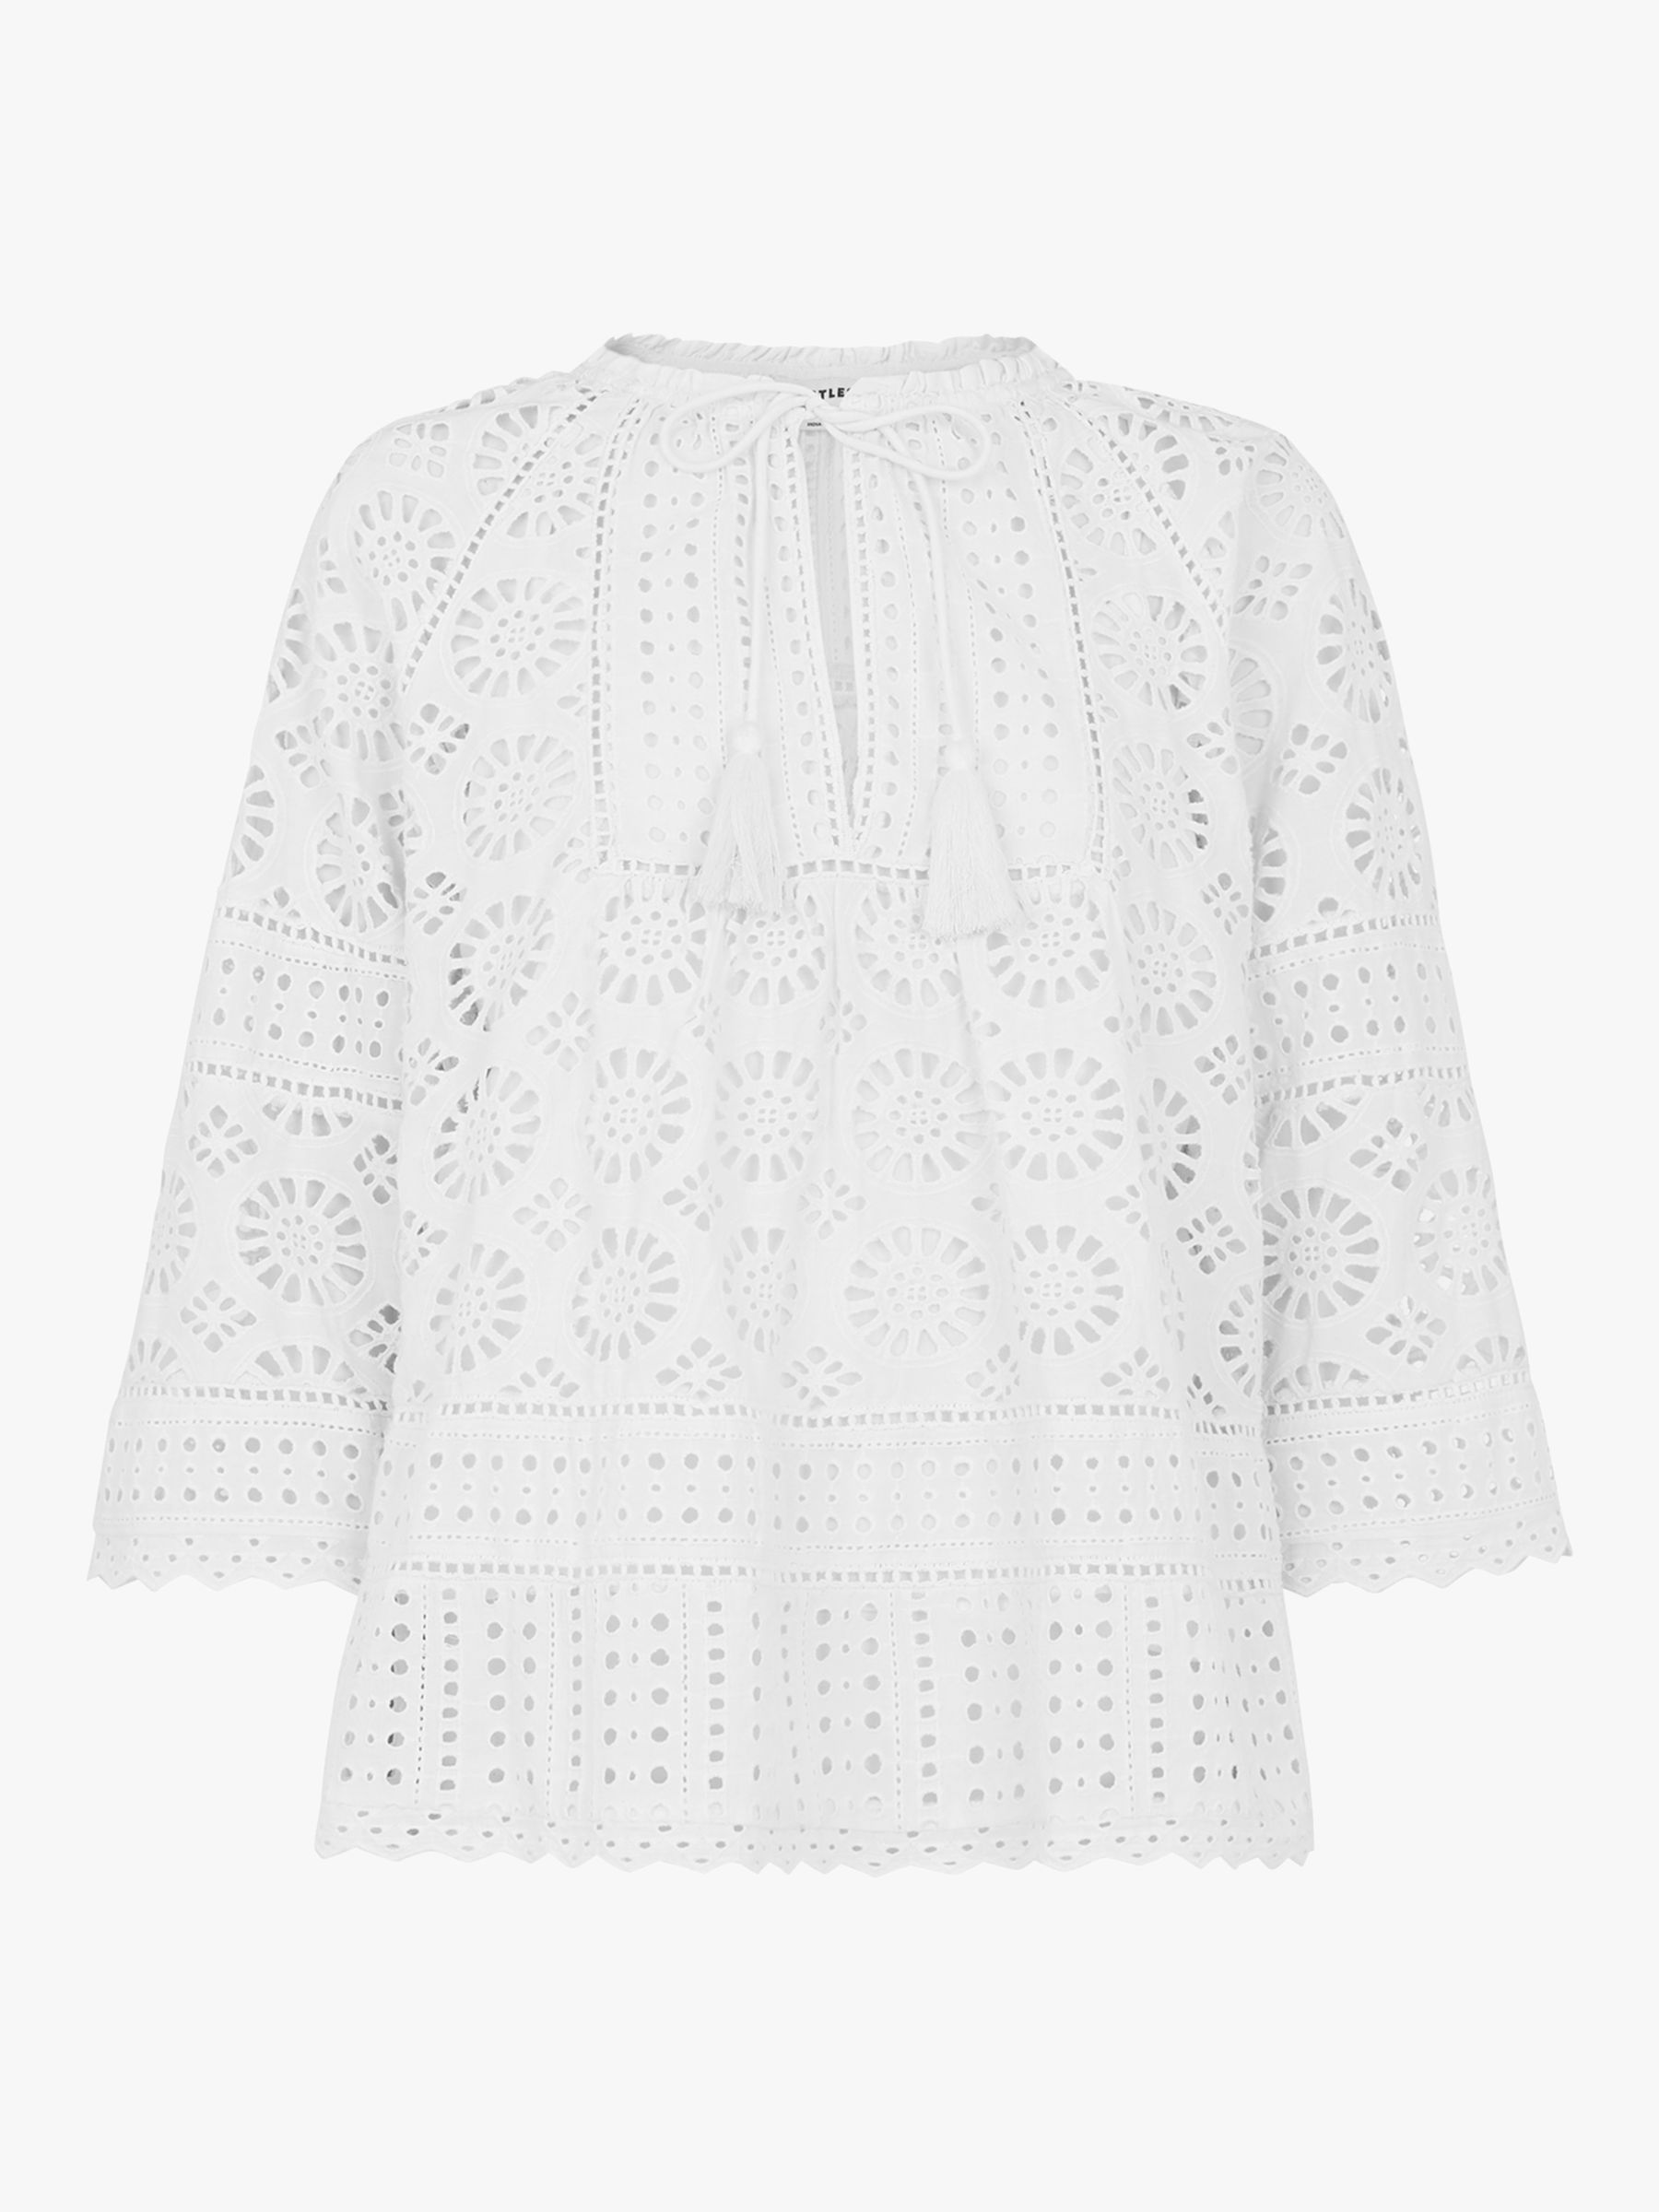 Whistles Maggie Broderie Blouse, White at John Lewis & Partners